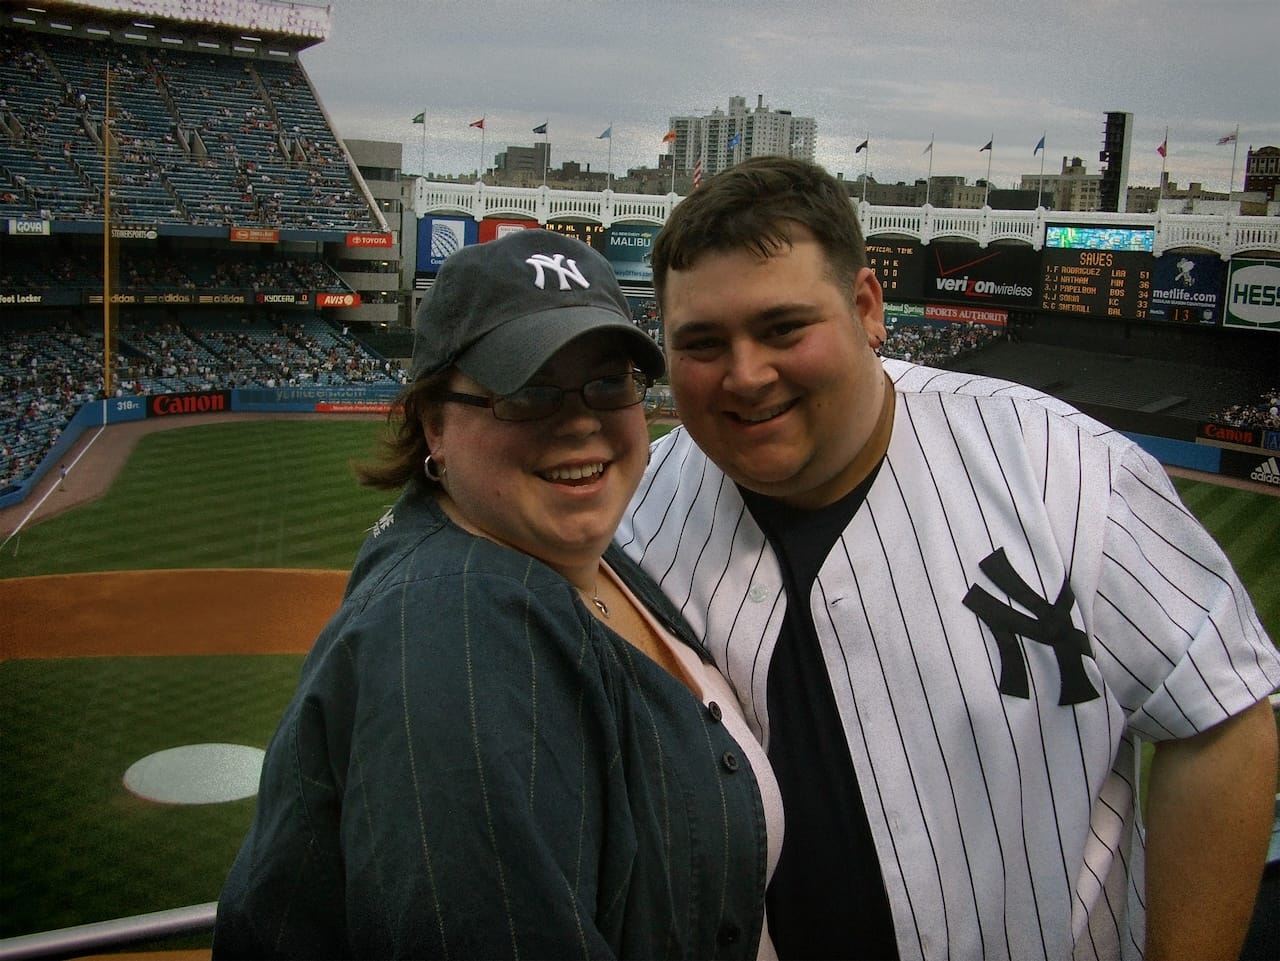 Ali and I standing in the top level of Yankee Stadium. You can see the field behind us.